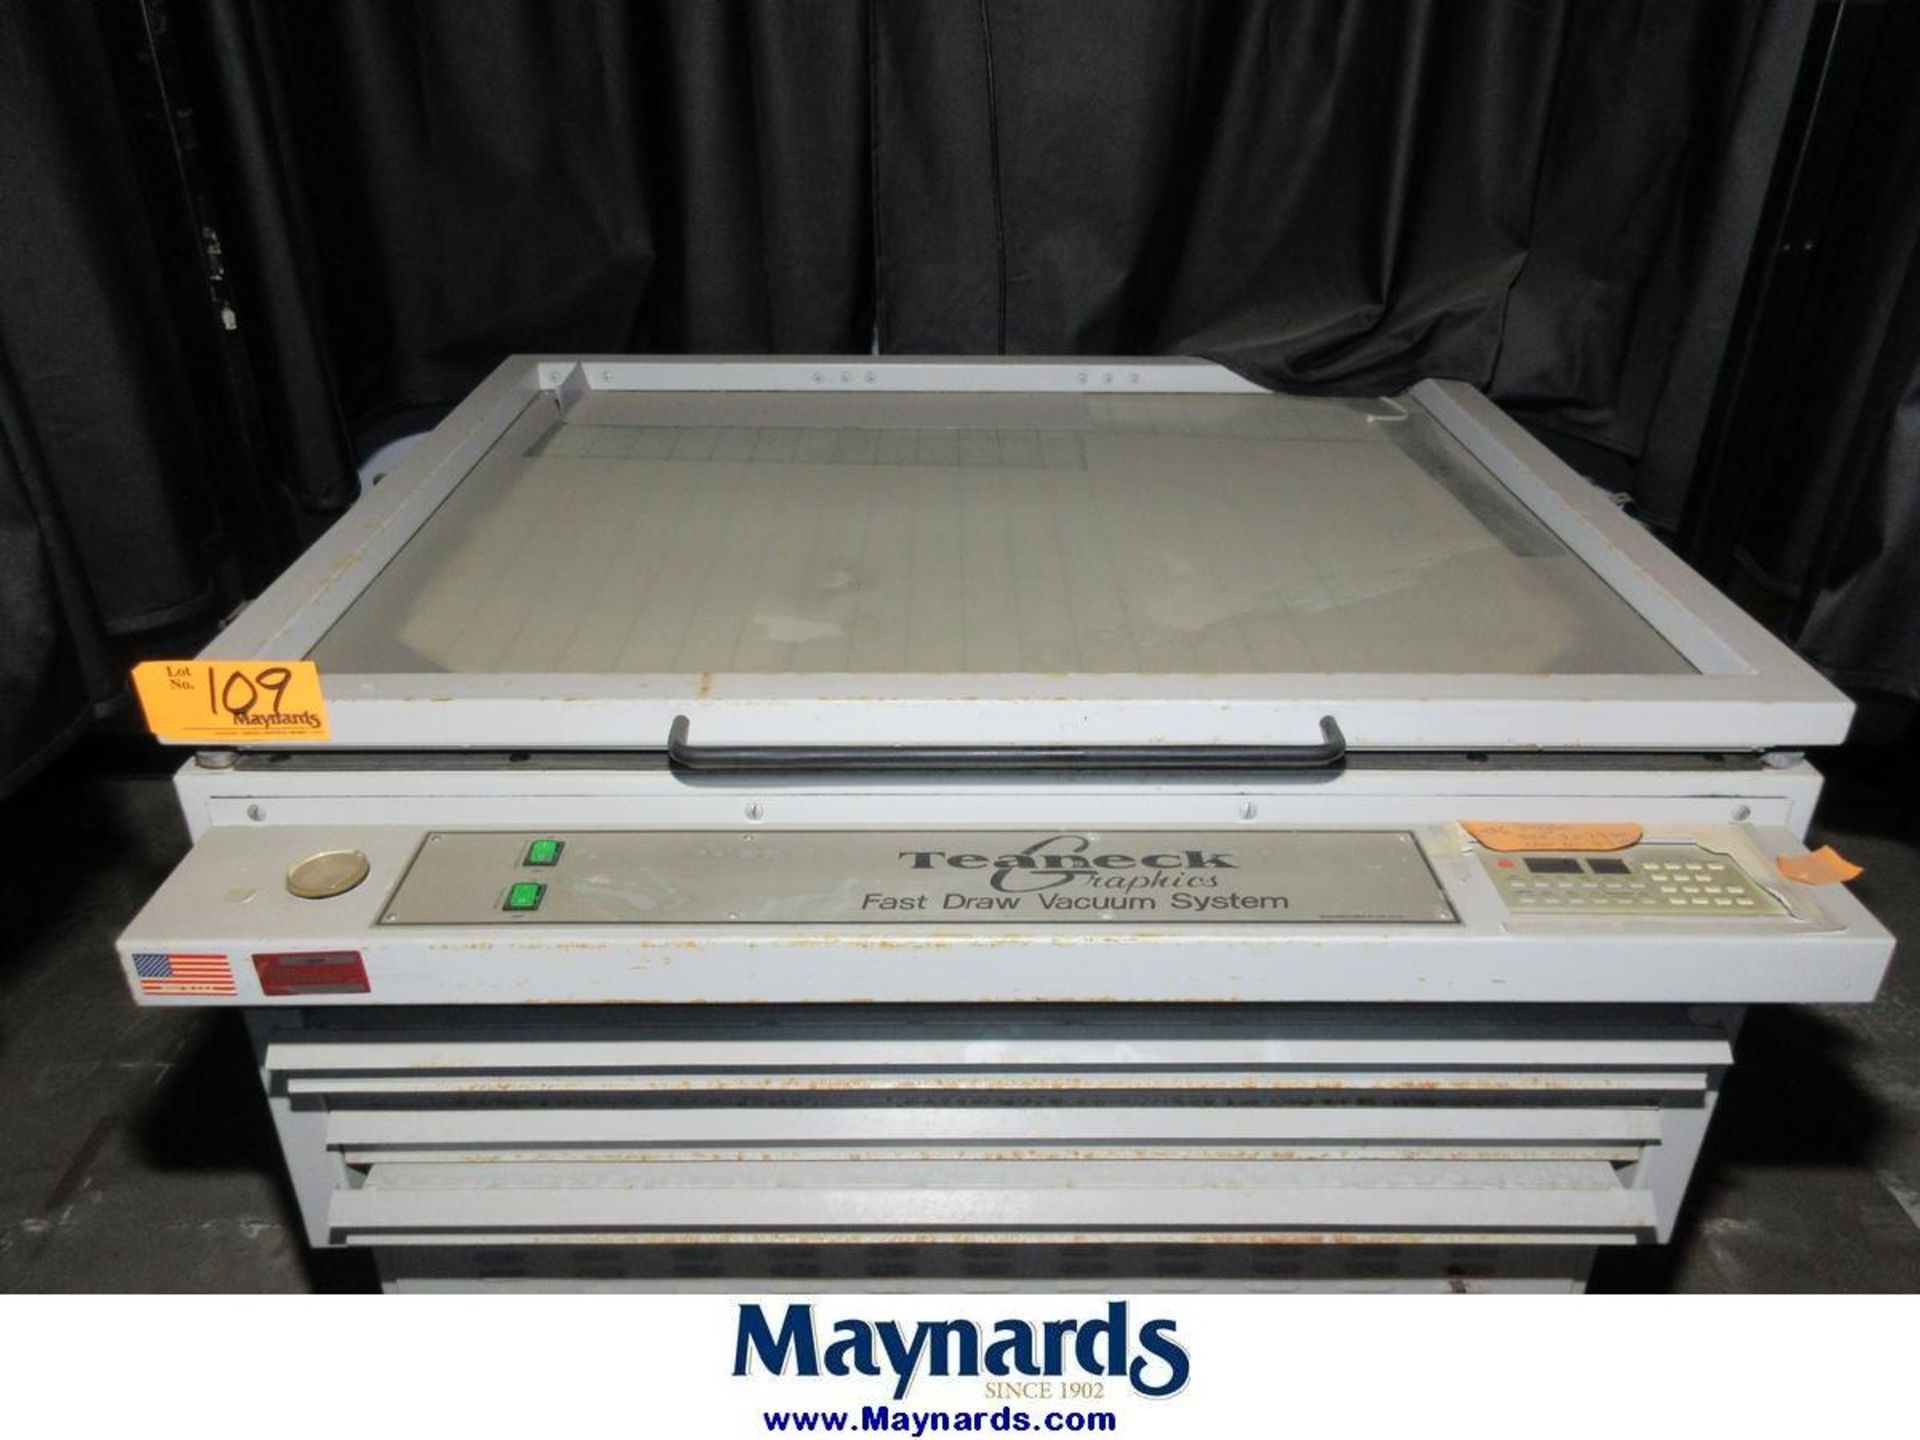 Teaneck Graphics 42"x36" Fast Draw Vacuum System - Image 3 of 9